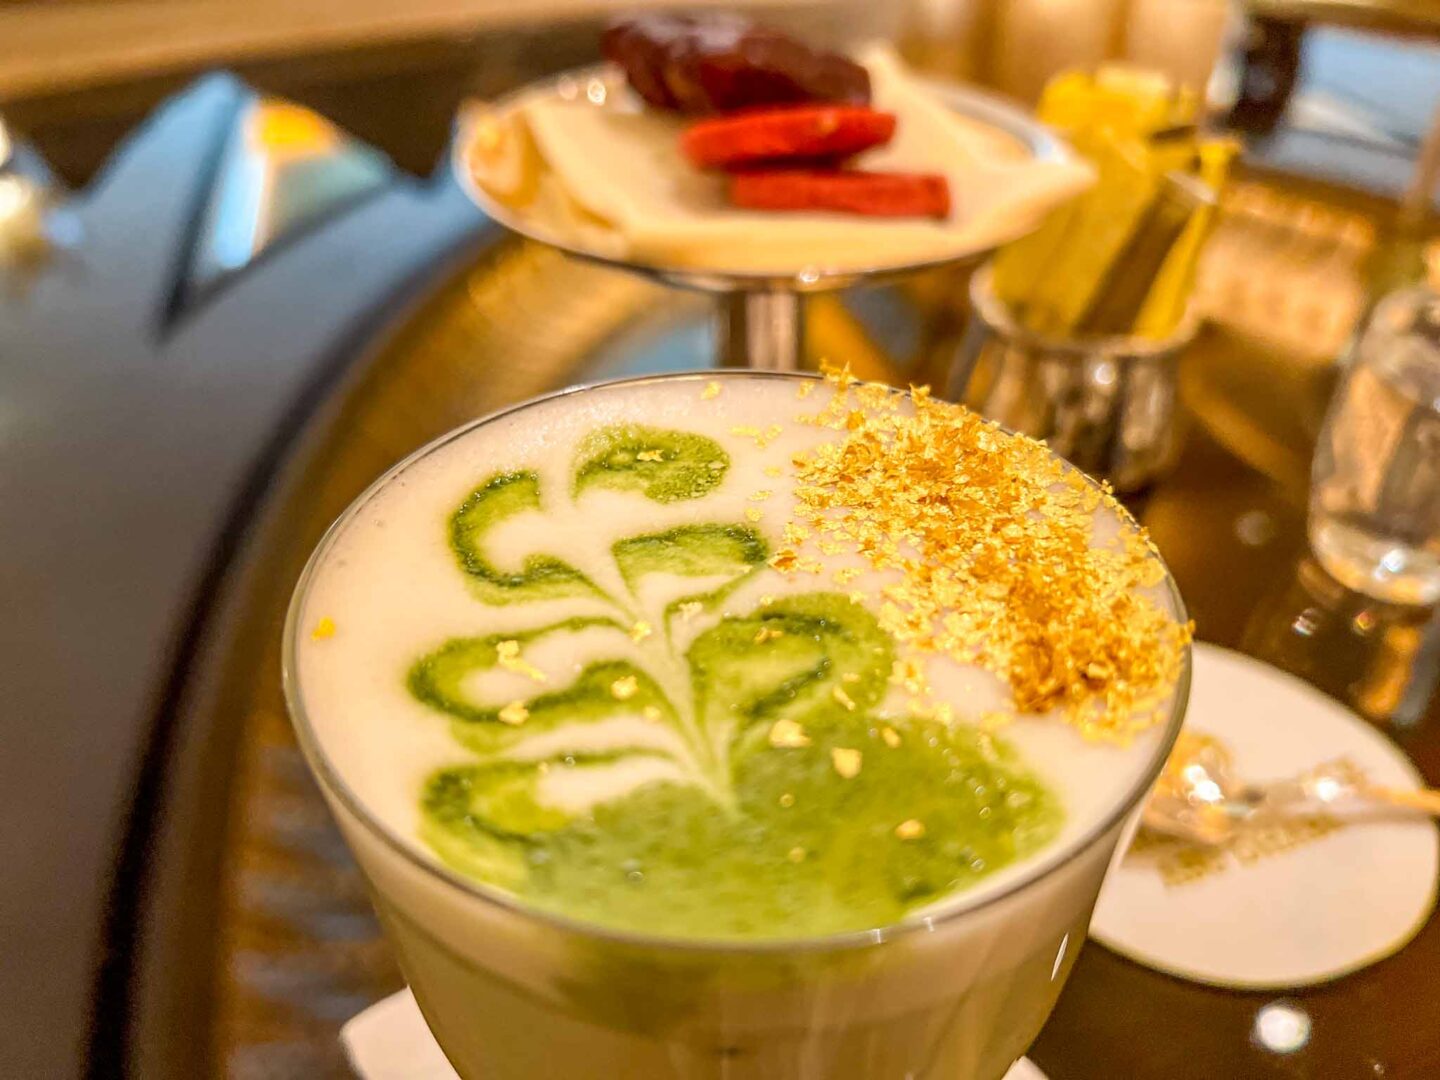 Things to do in Abu Dhabi, Emirates Palace Gold Matcha Latte with dates